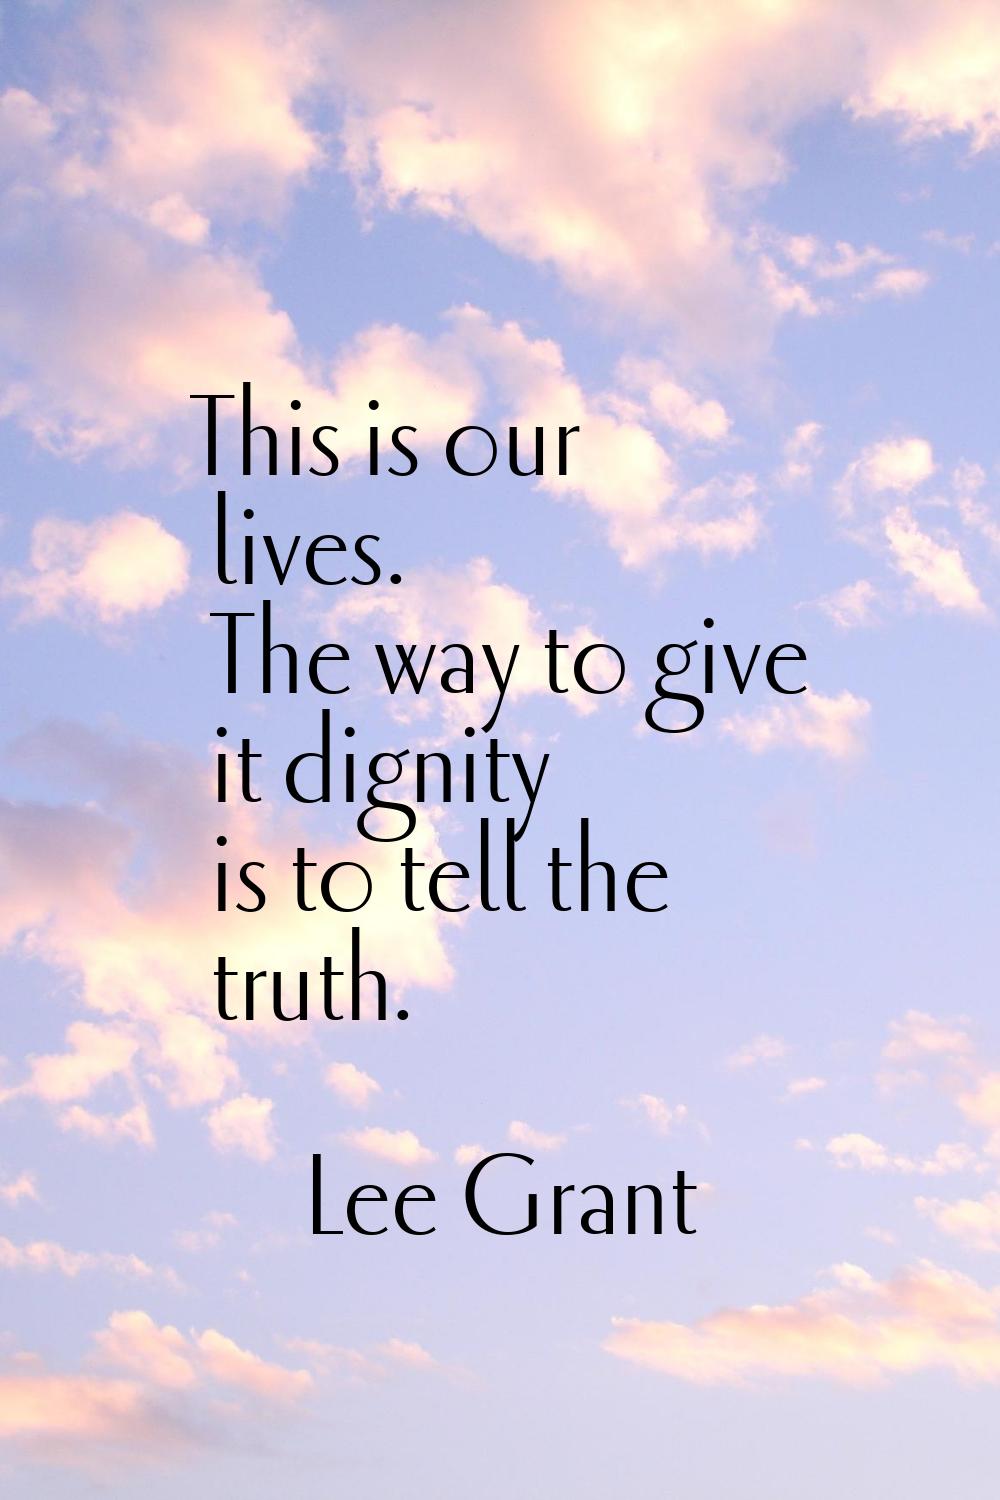 This is our lives. The way to give it dignity is to tell the truth.